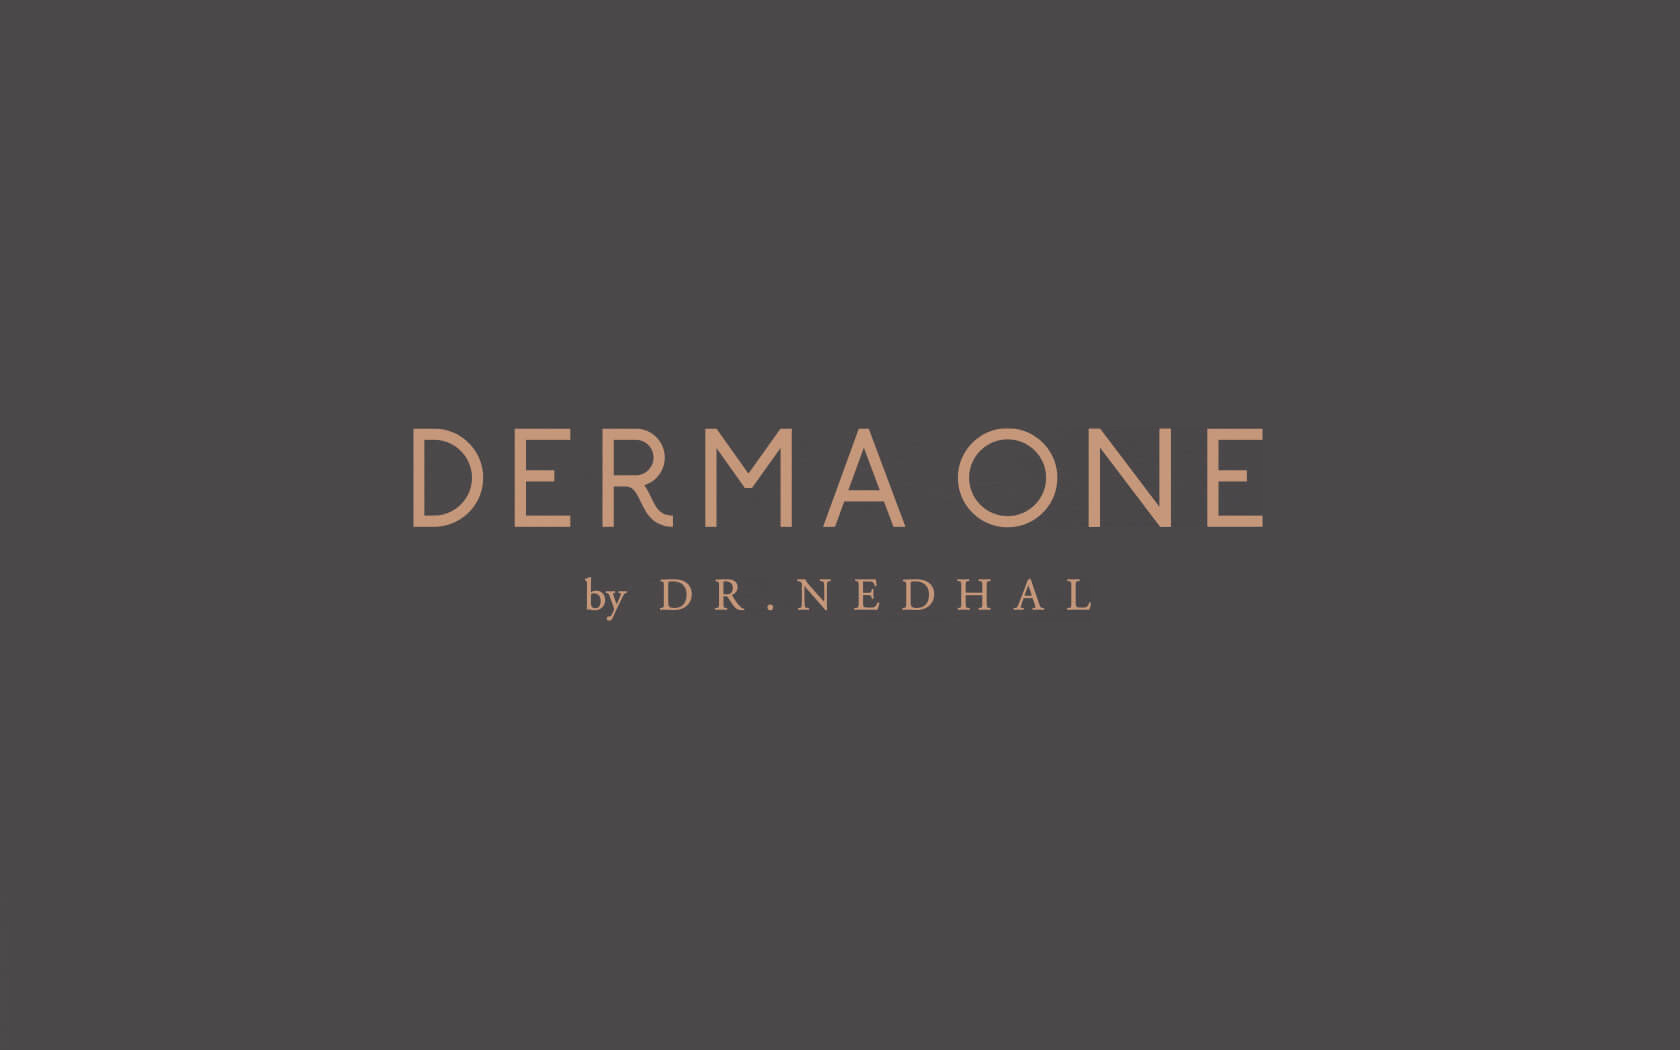 Derma One. Brand logo with Dr. Nedhal